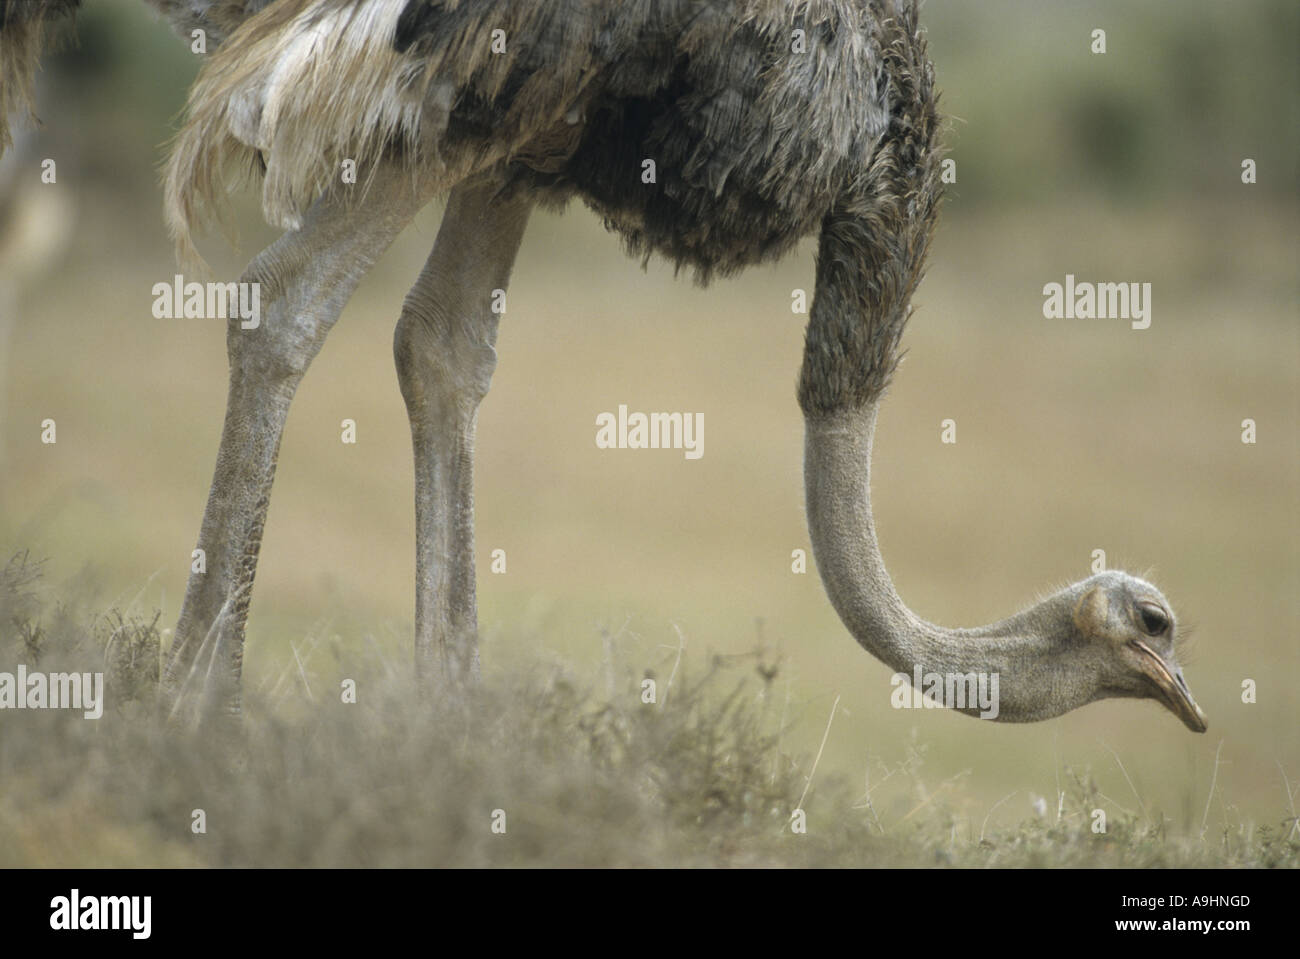 ostrich (Struthio camelus), searching food, South Africa, Ostkap, Addoelephant NP Stock Photo